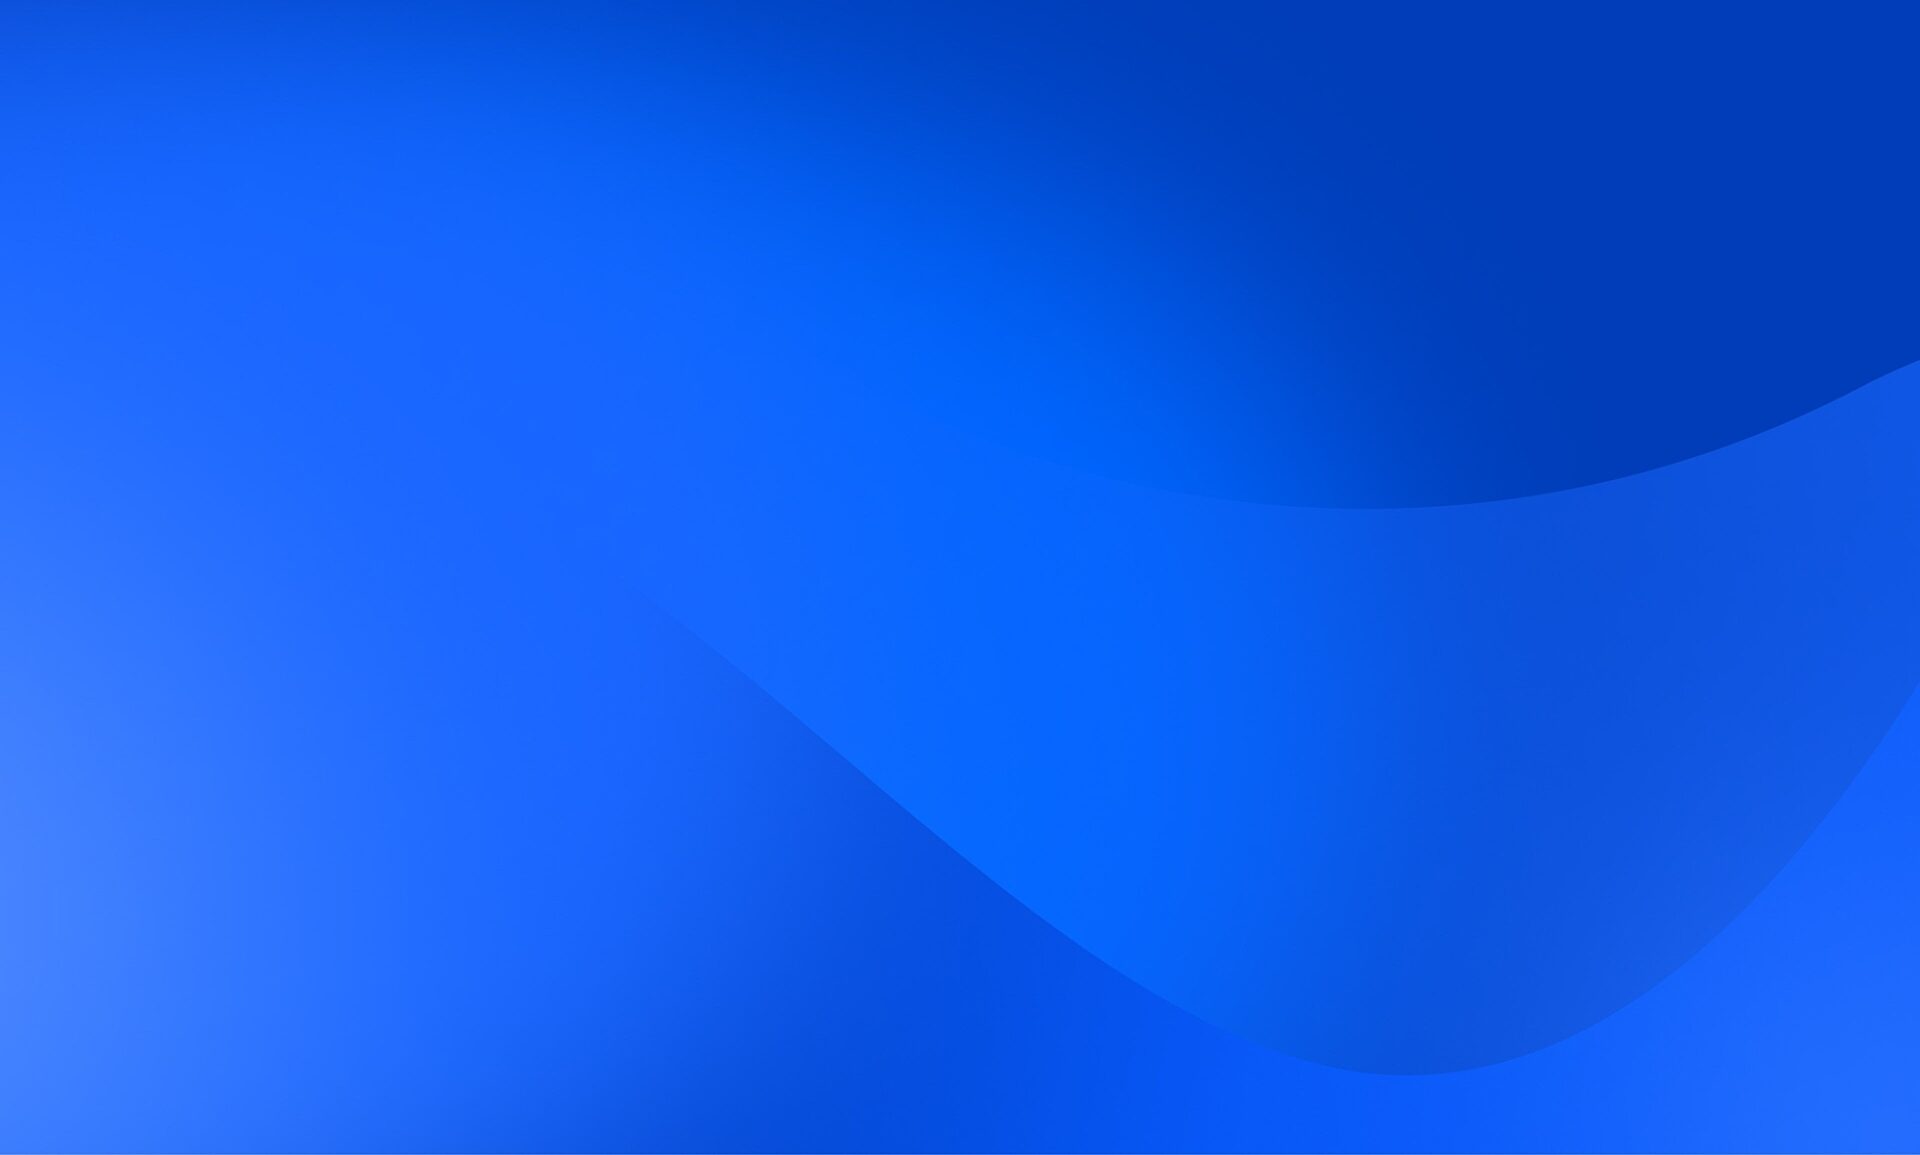 Section background blue